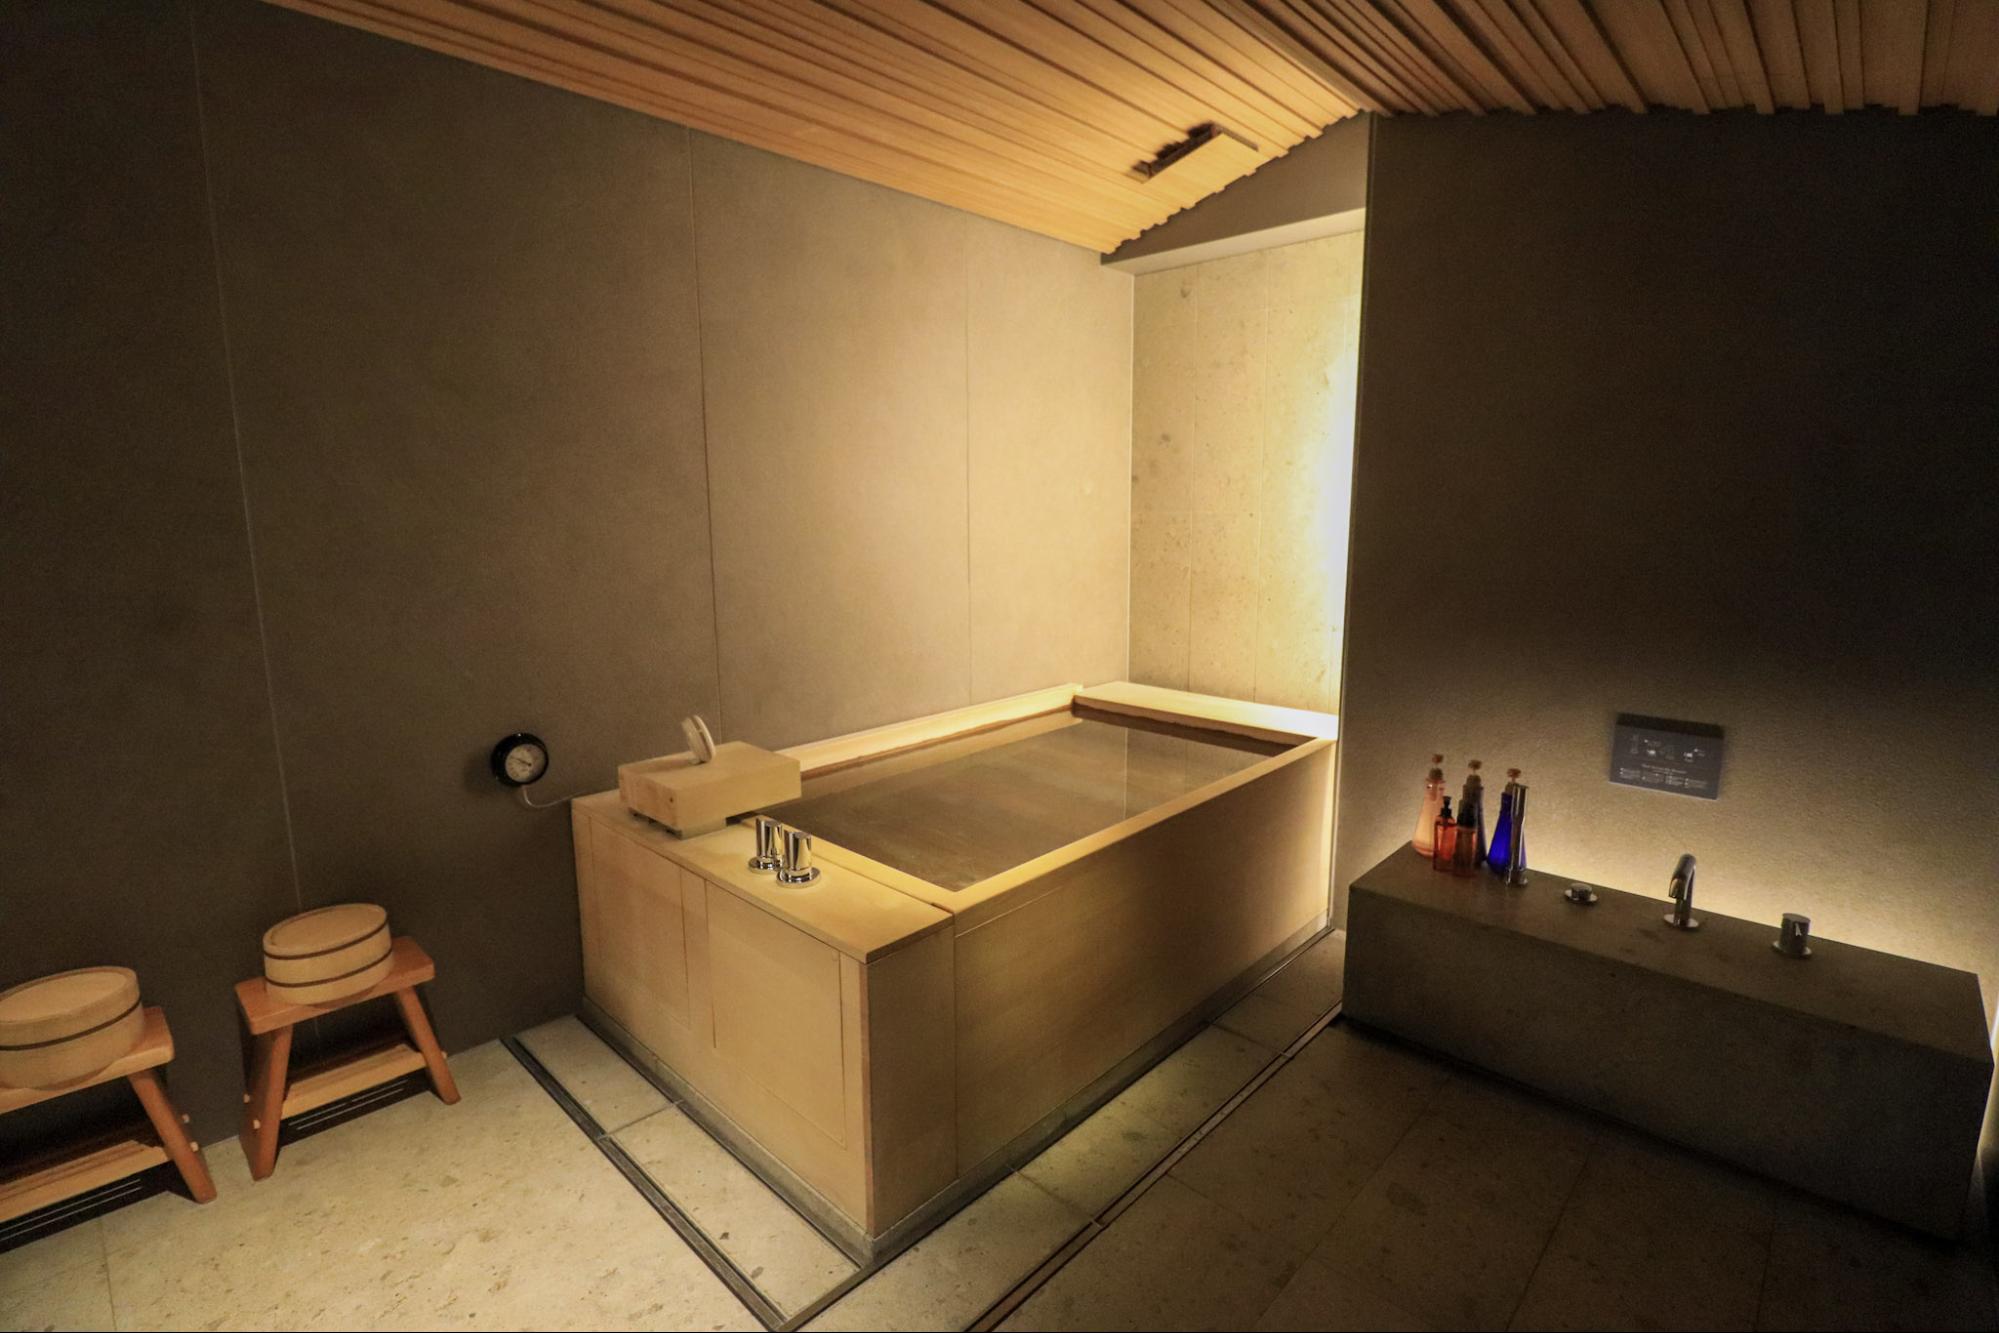 【Hotel Stay Review】Sake & Hinoki Bath at TSUKI Tokyo, a Hotel that Will Make You a Japan Connoisseur!